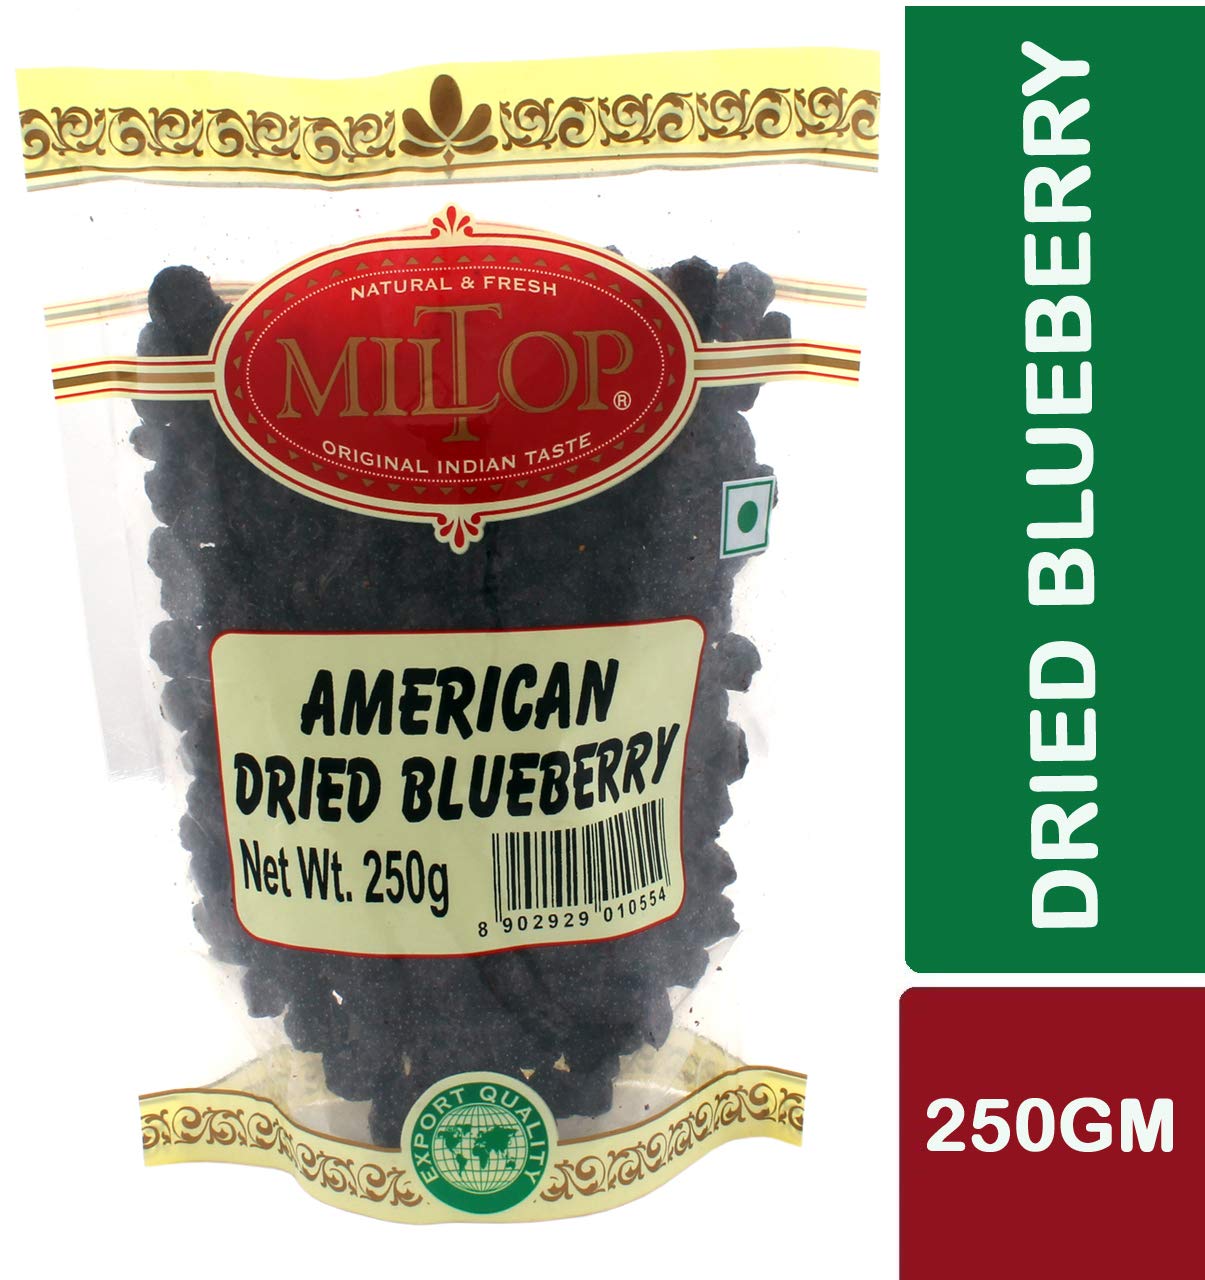 Miltop American Dried Blueberries, 250g